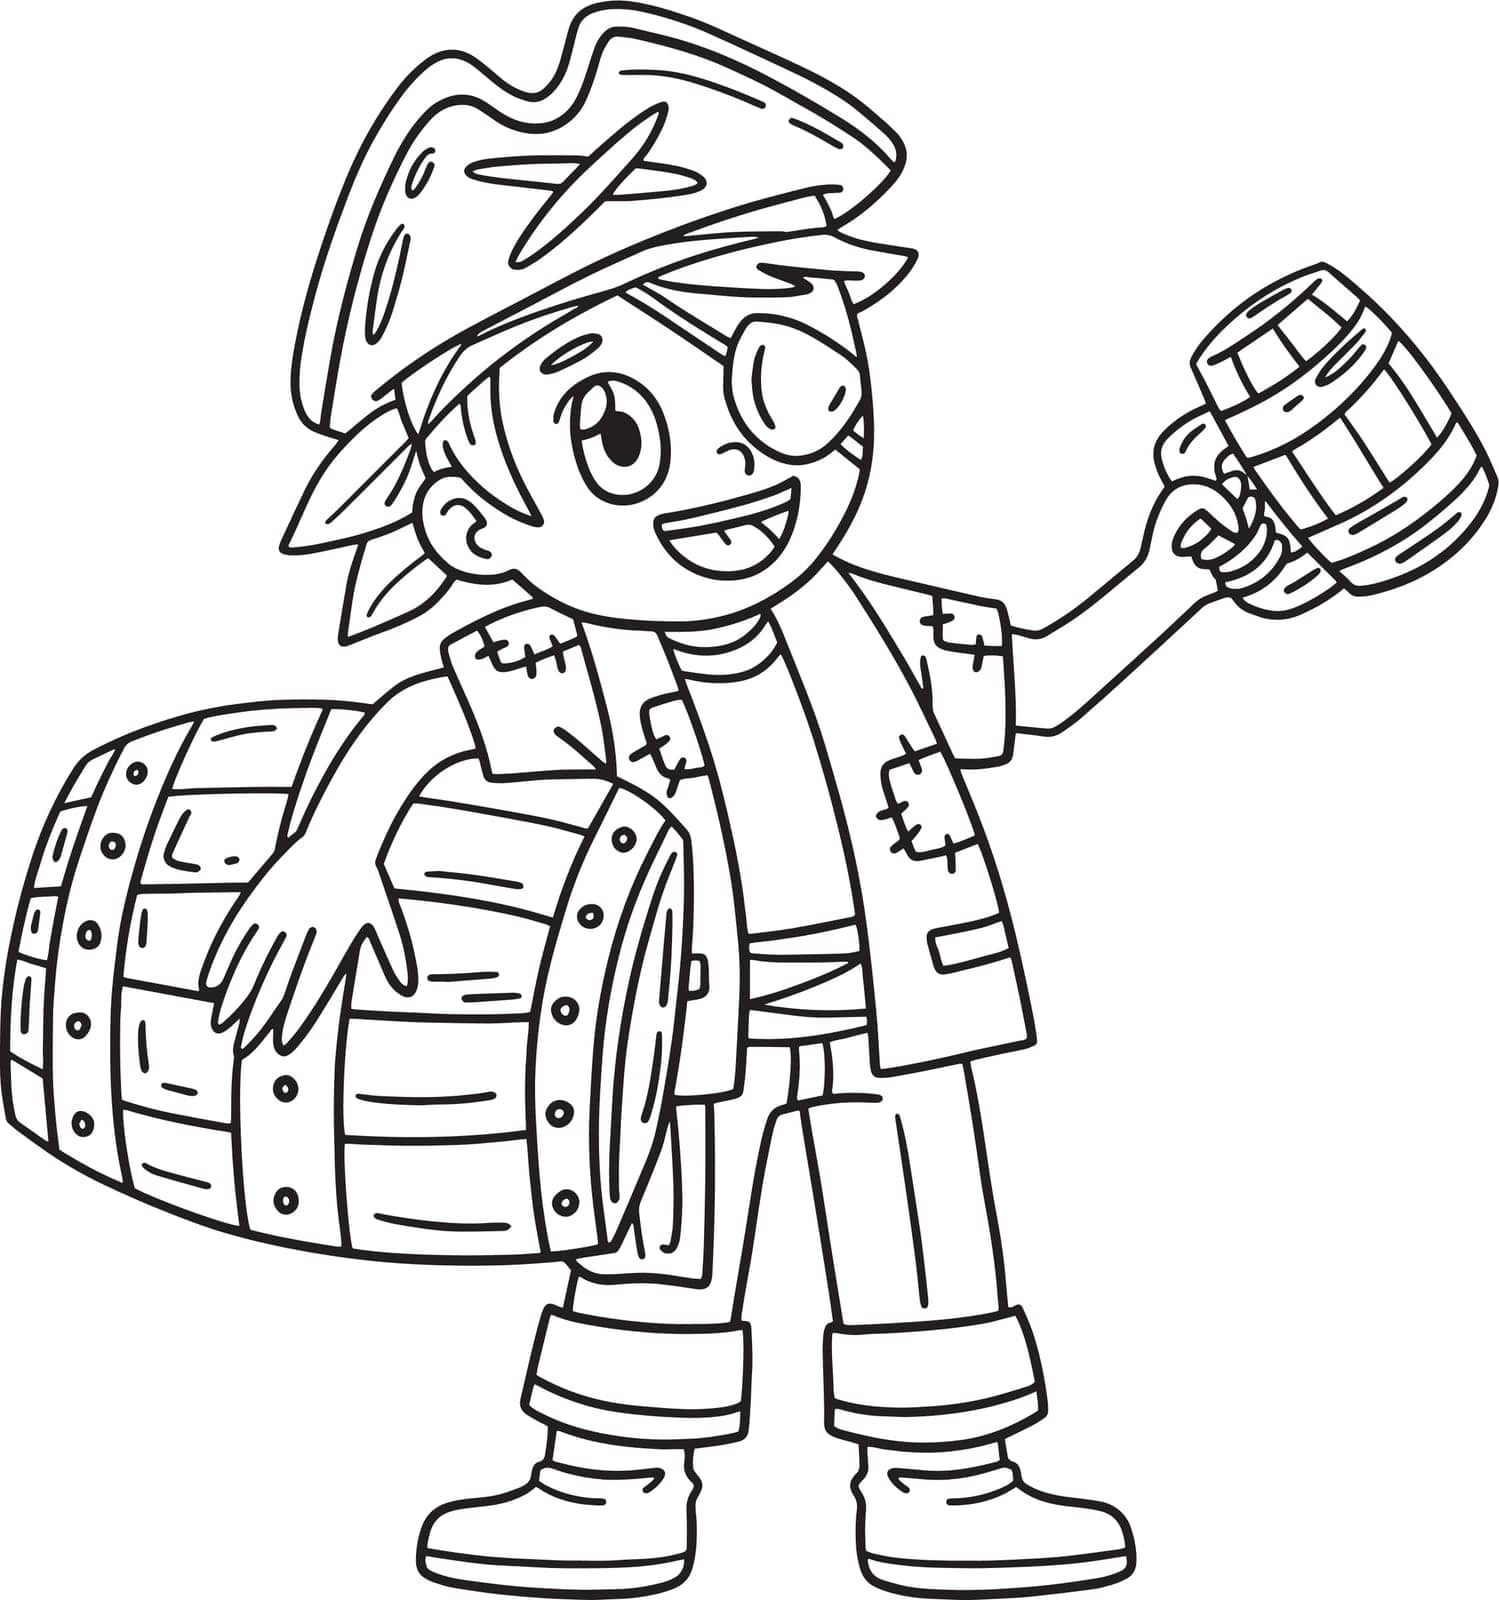 A cute and funny coloring page of a Pirate with Barrel of Rum. Provides hours of coloring fun for children. Color, this page is very easy. Suitable for little kids and toddlers.